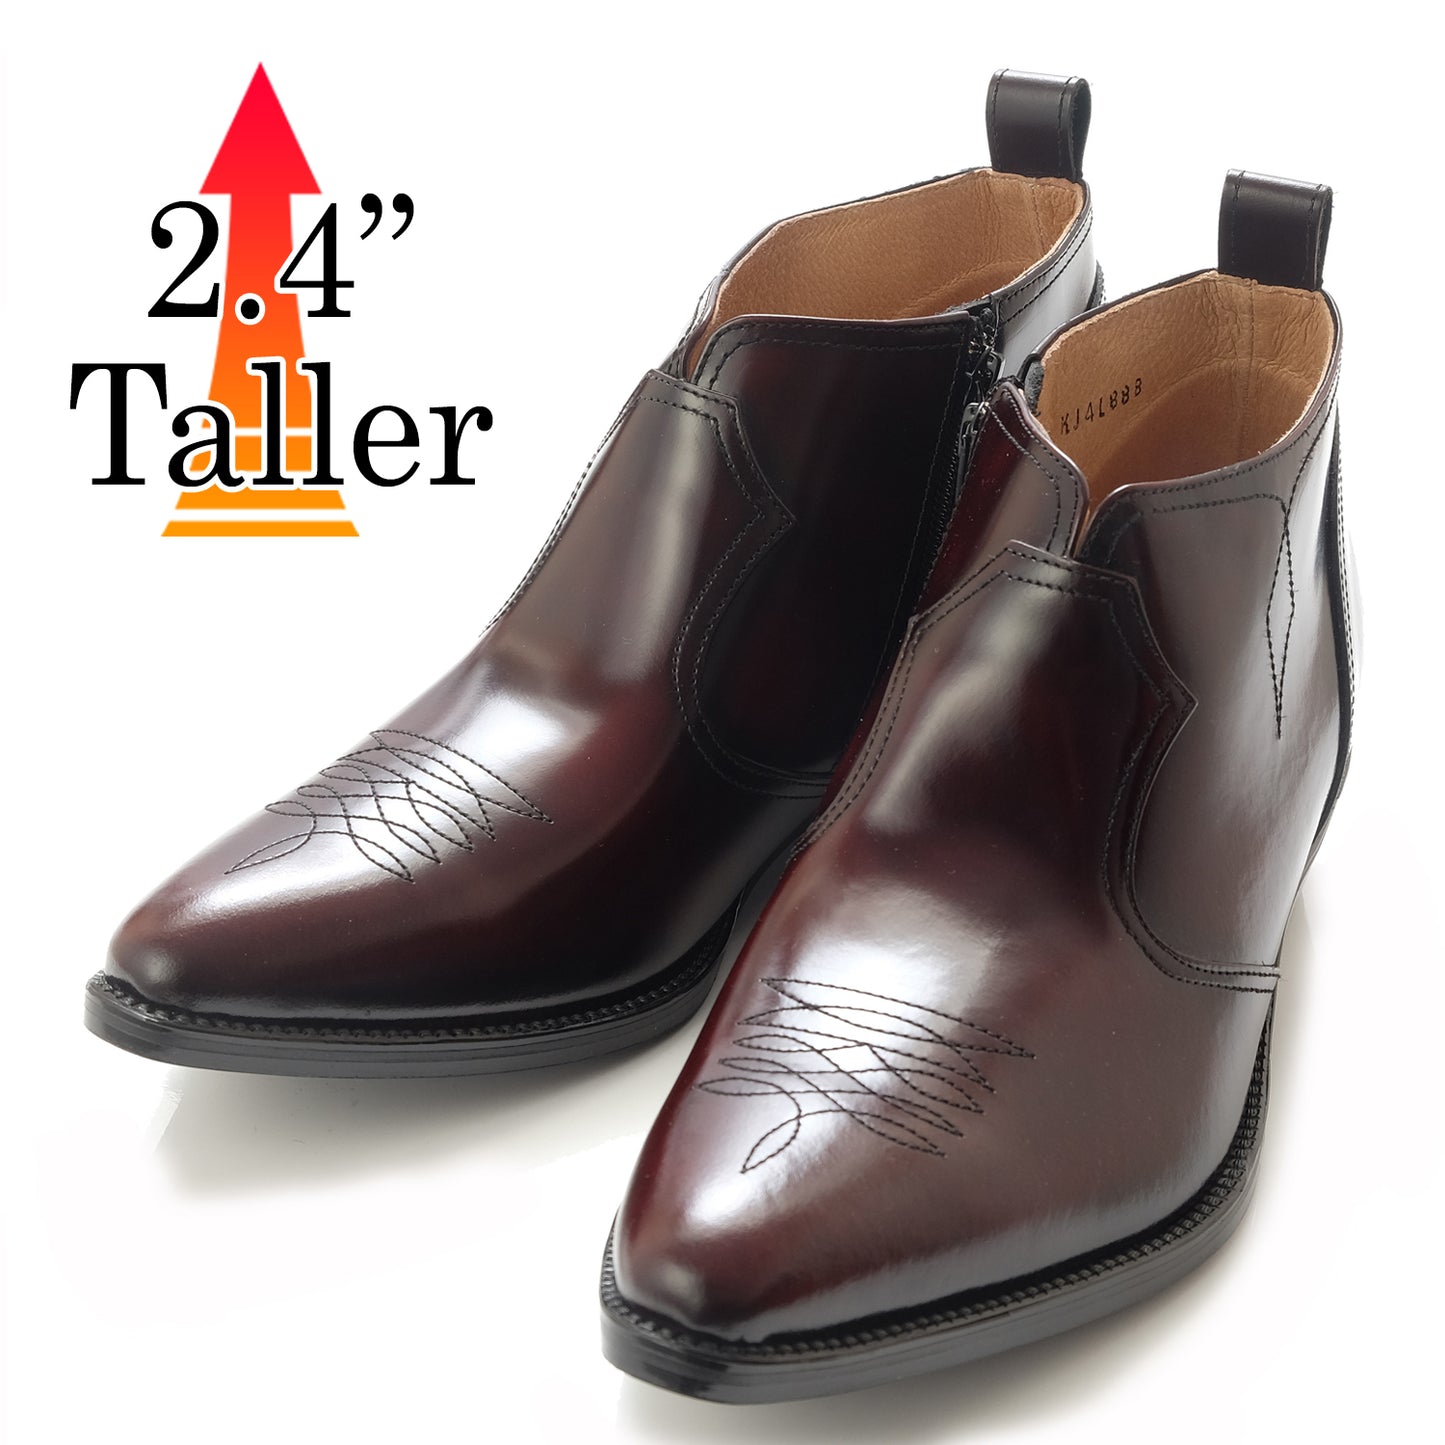 Men's Elevator Shoes Height Increasing 2.36" Taller Ankle Cowboy Boots Side Zipper Genuine leather Western-style No. 888